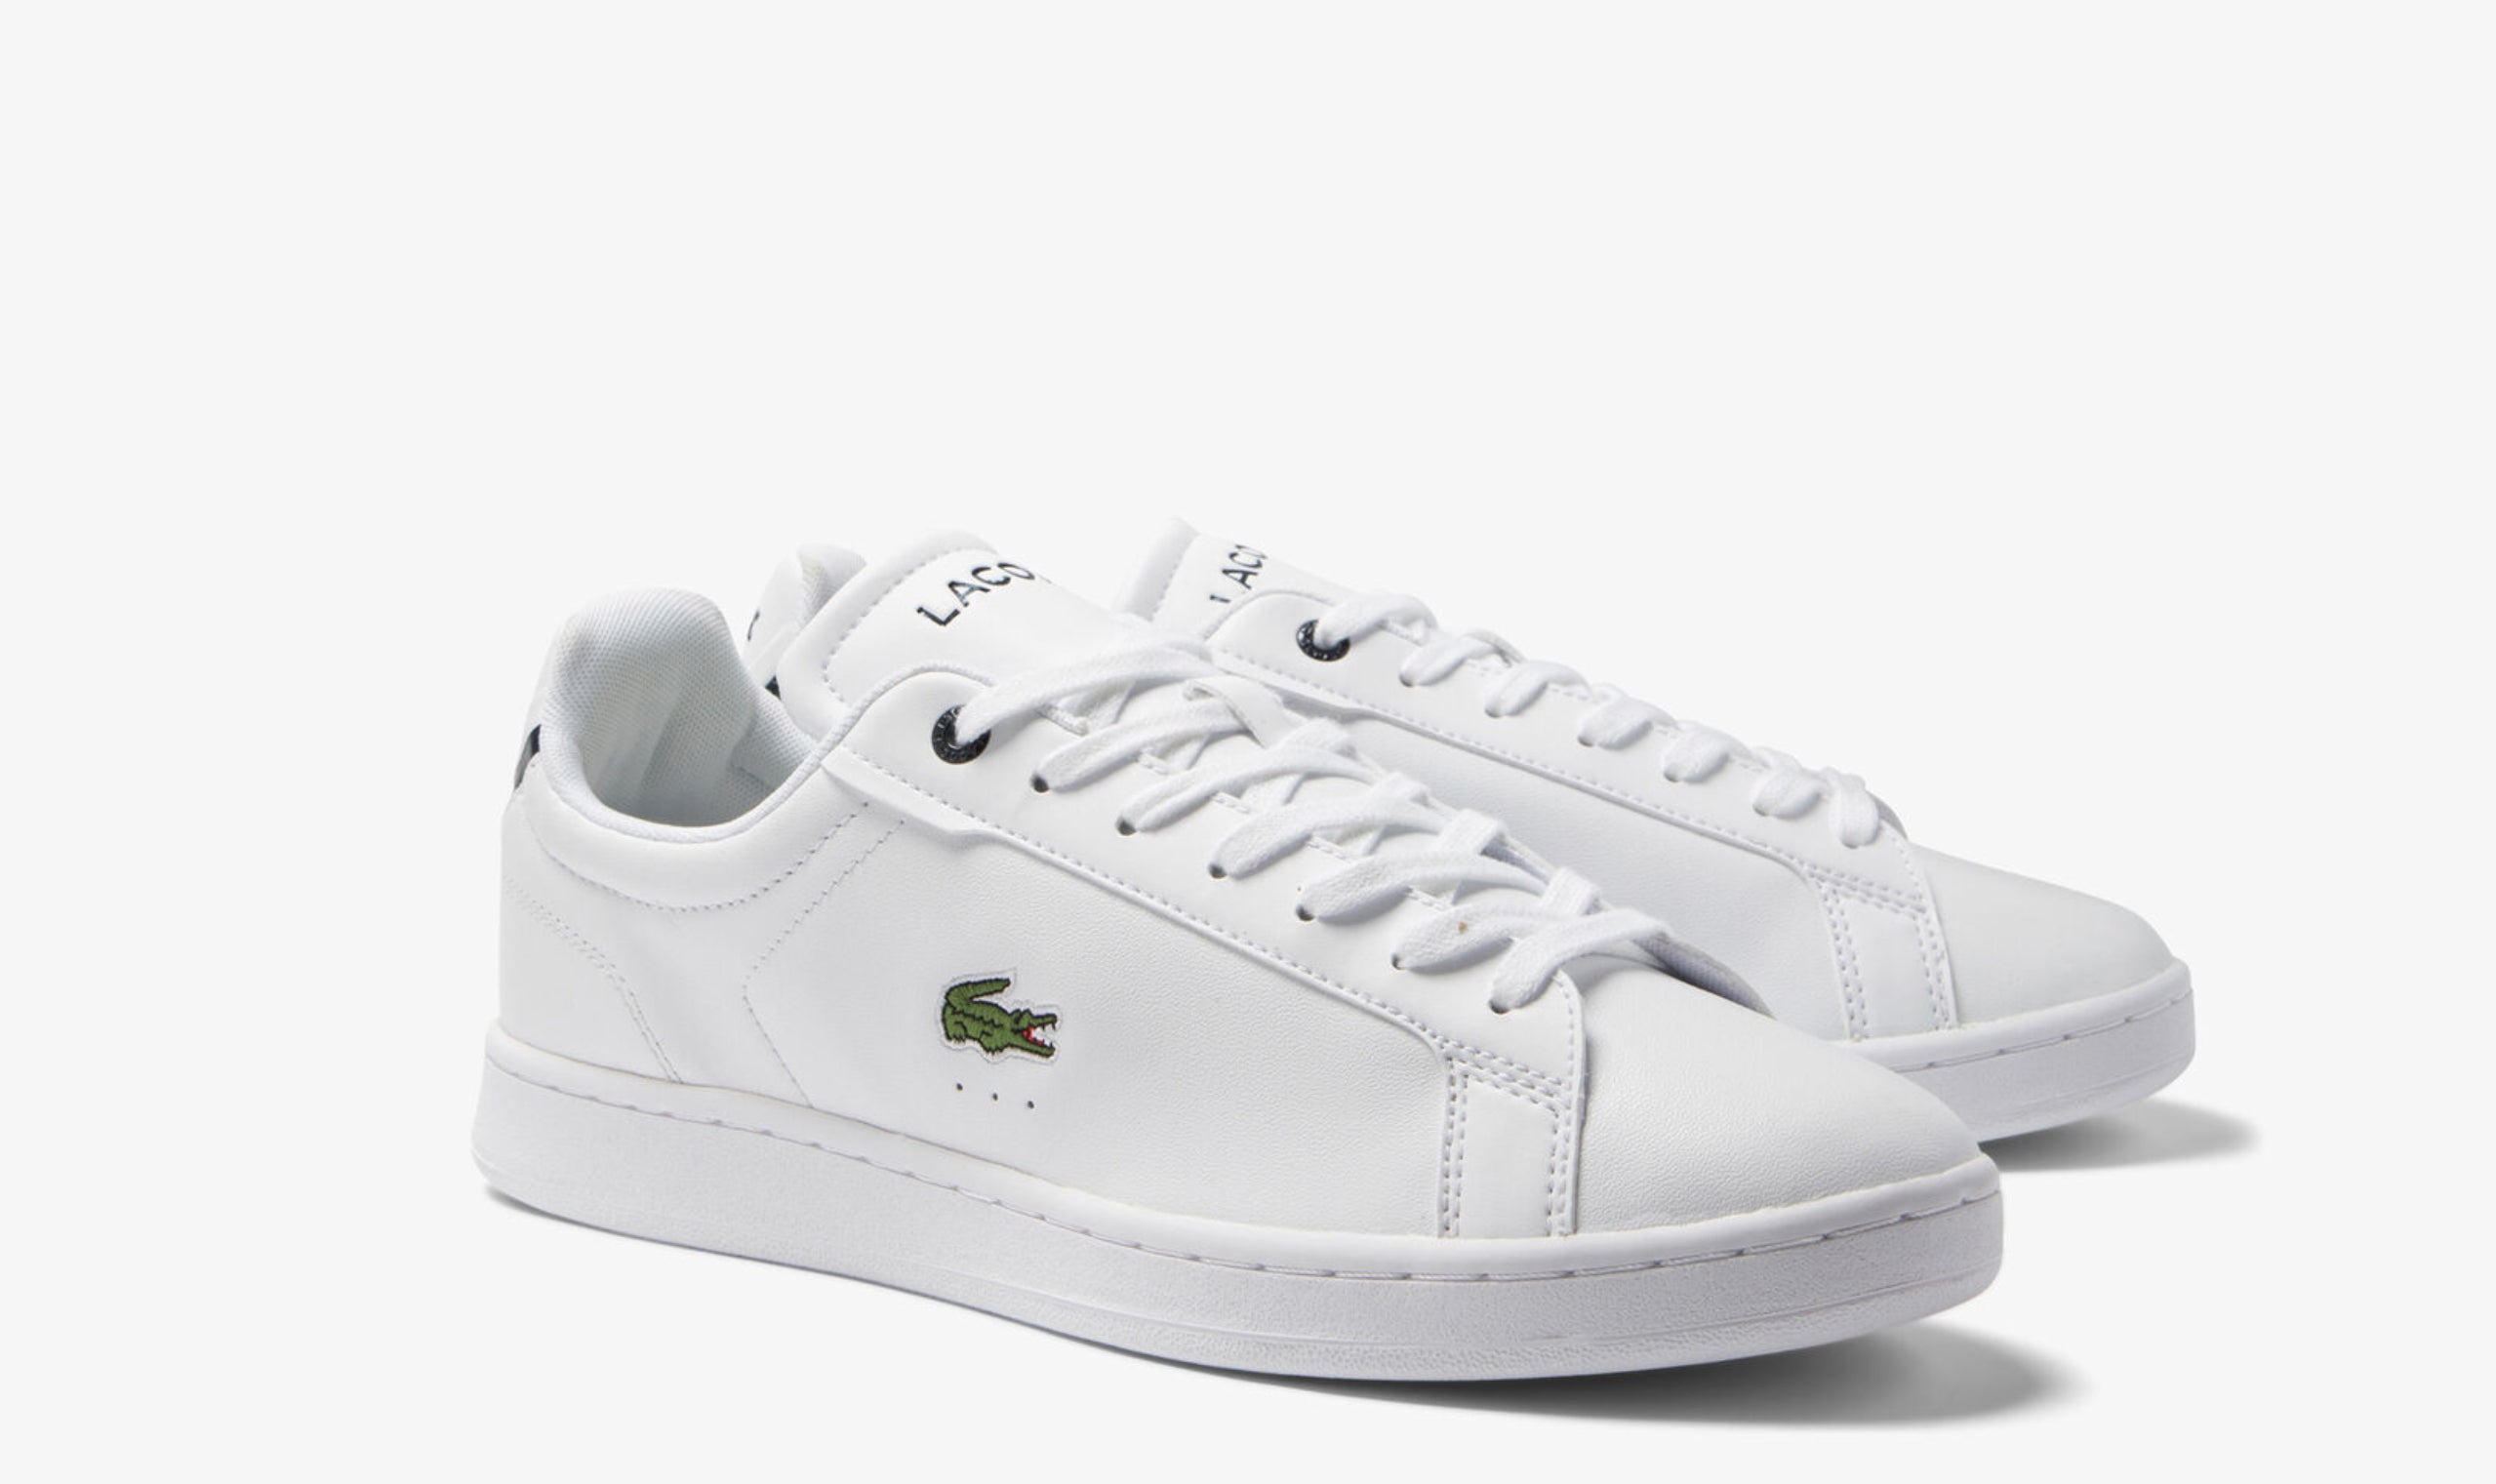 Lacoste Carnaby Pro Bi Leather Tonal Trainer Sneakers White/Navy